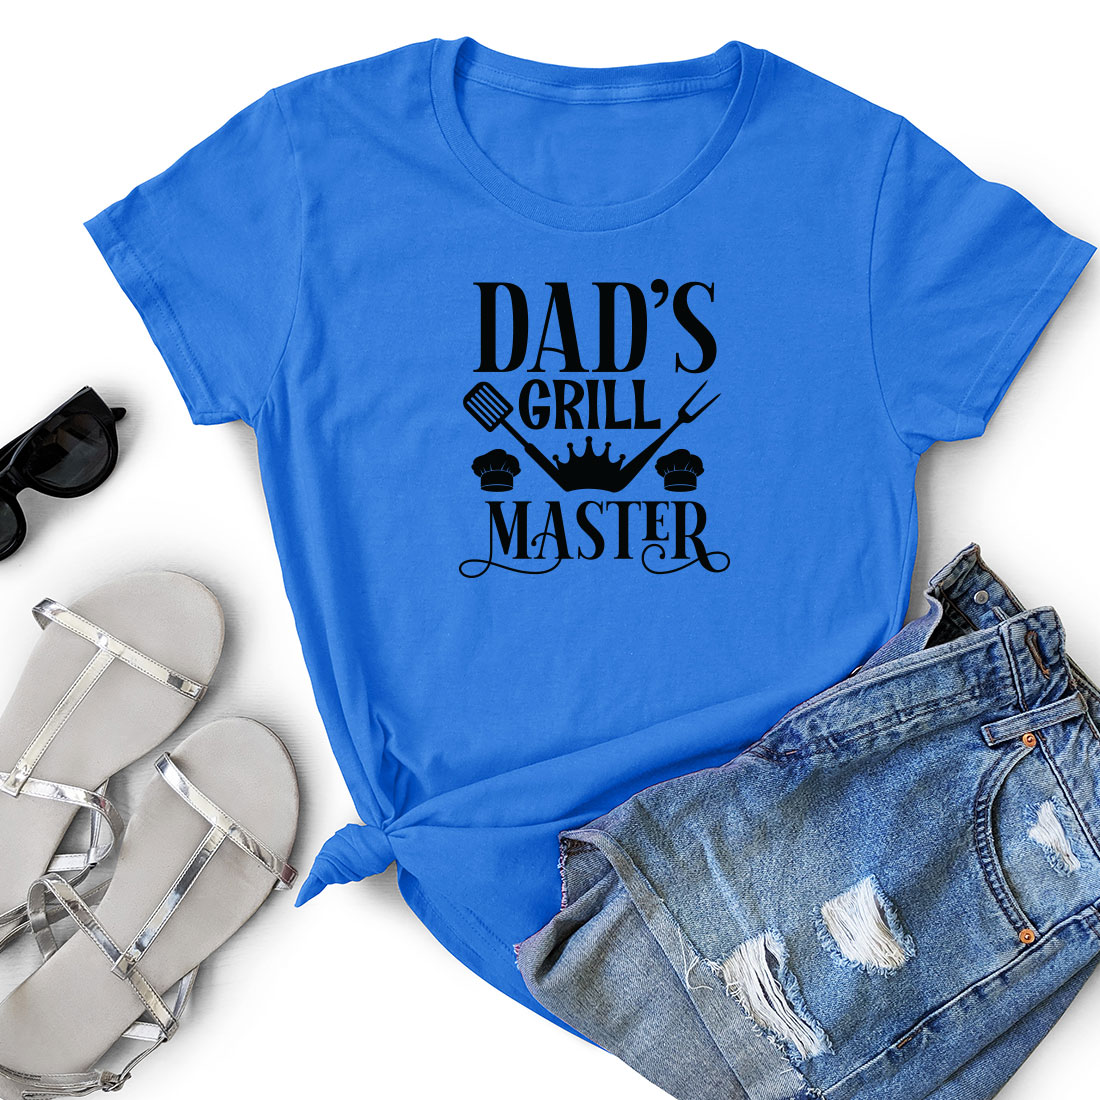 T - shirt that says dad's grill master next to a pair of.